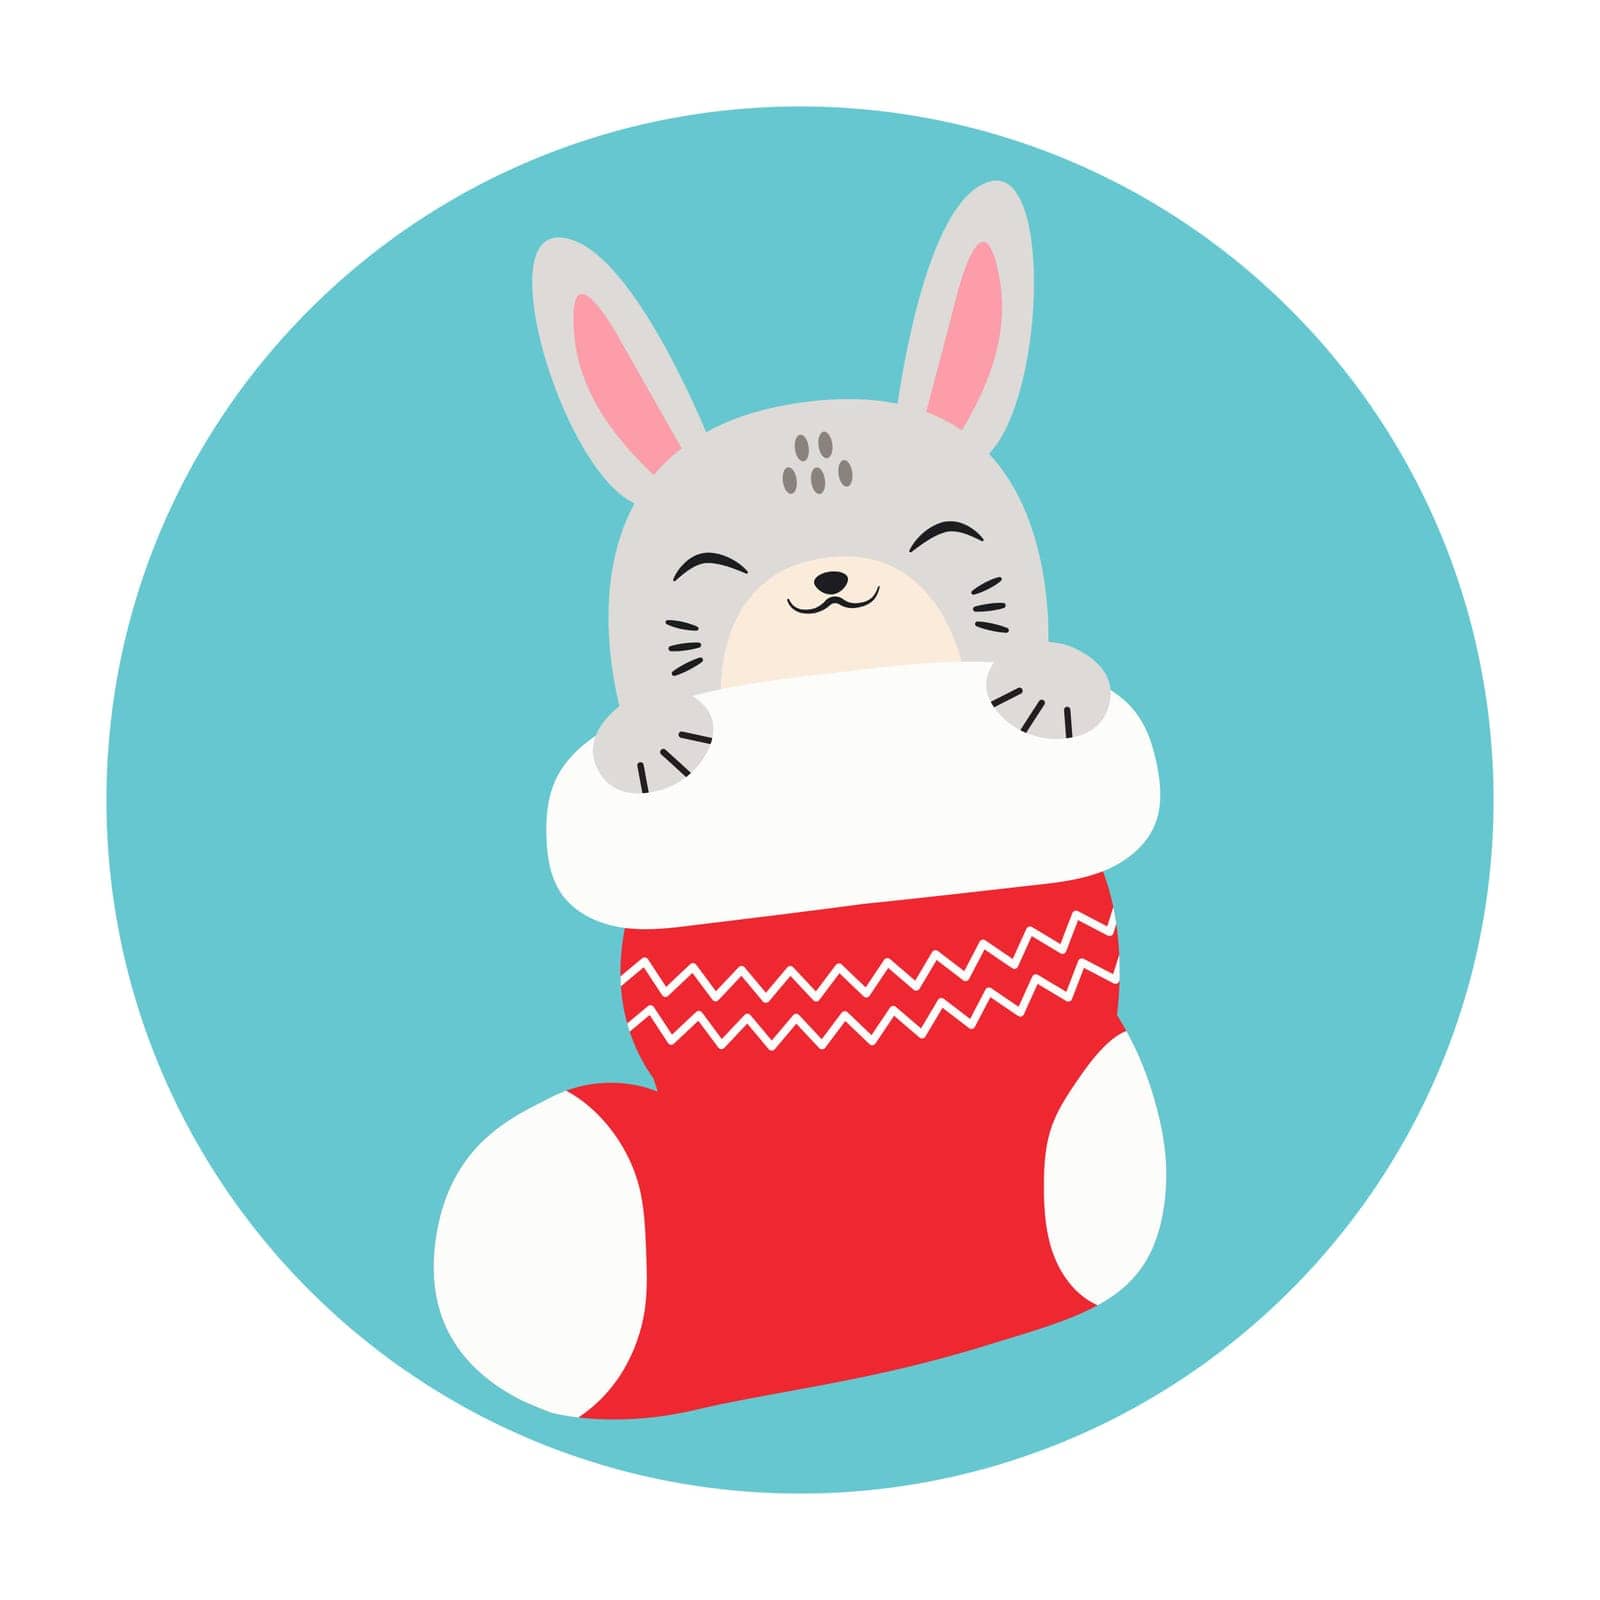 Cute hare sleeps in a Christmas stocking. Happy Holidays. Winter animal. Vector illustration